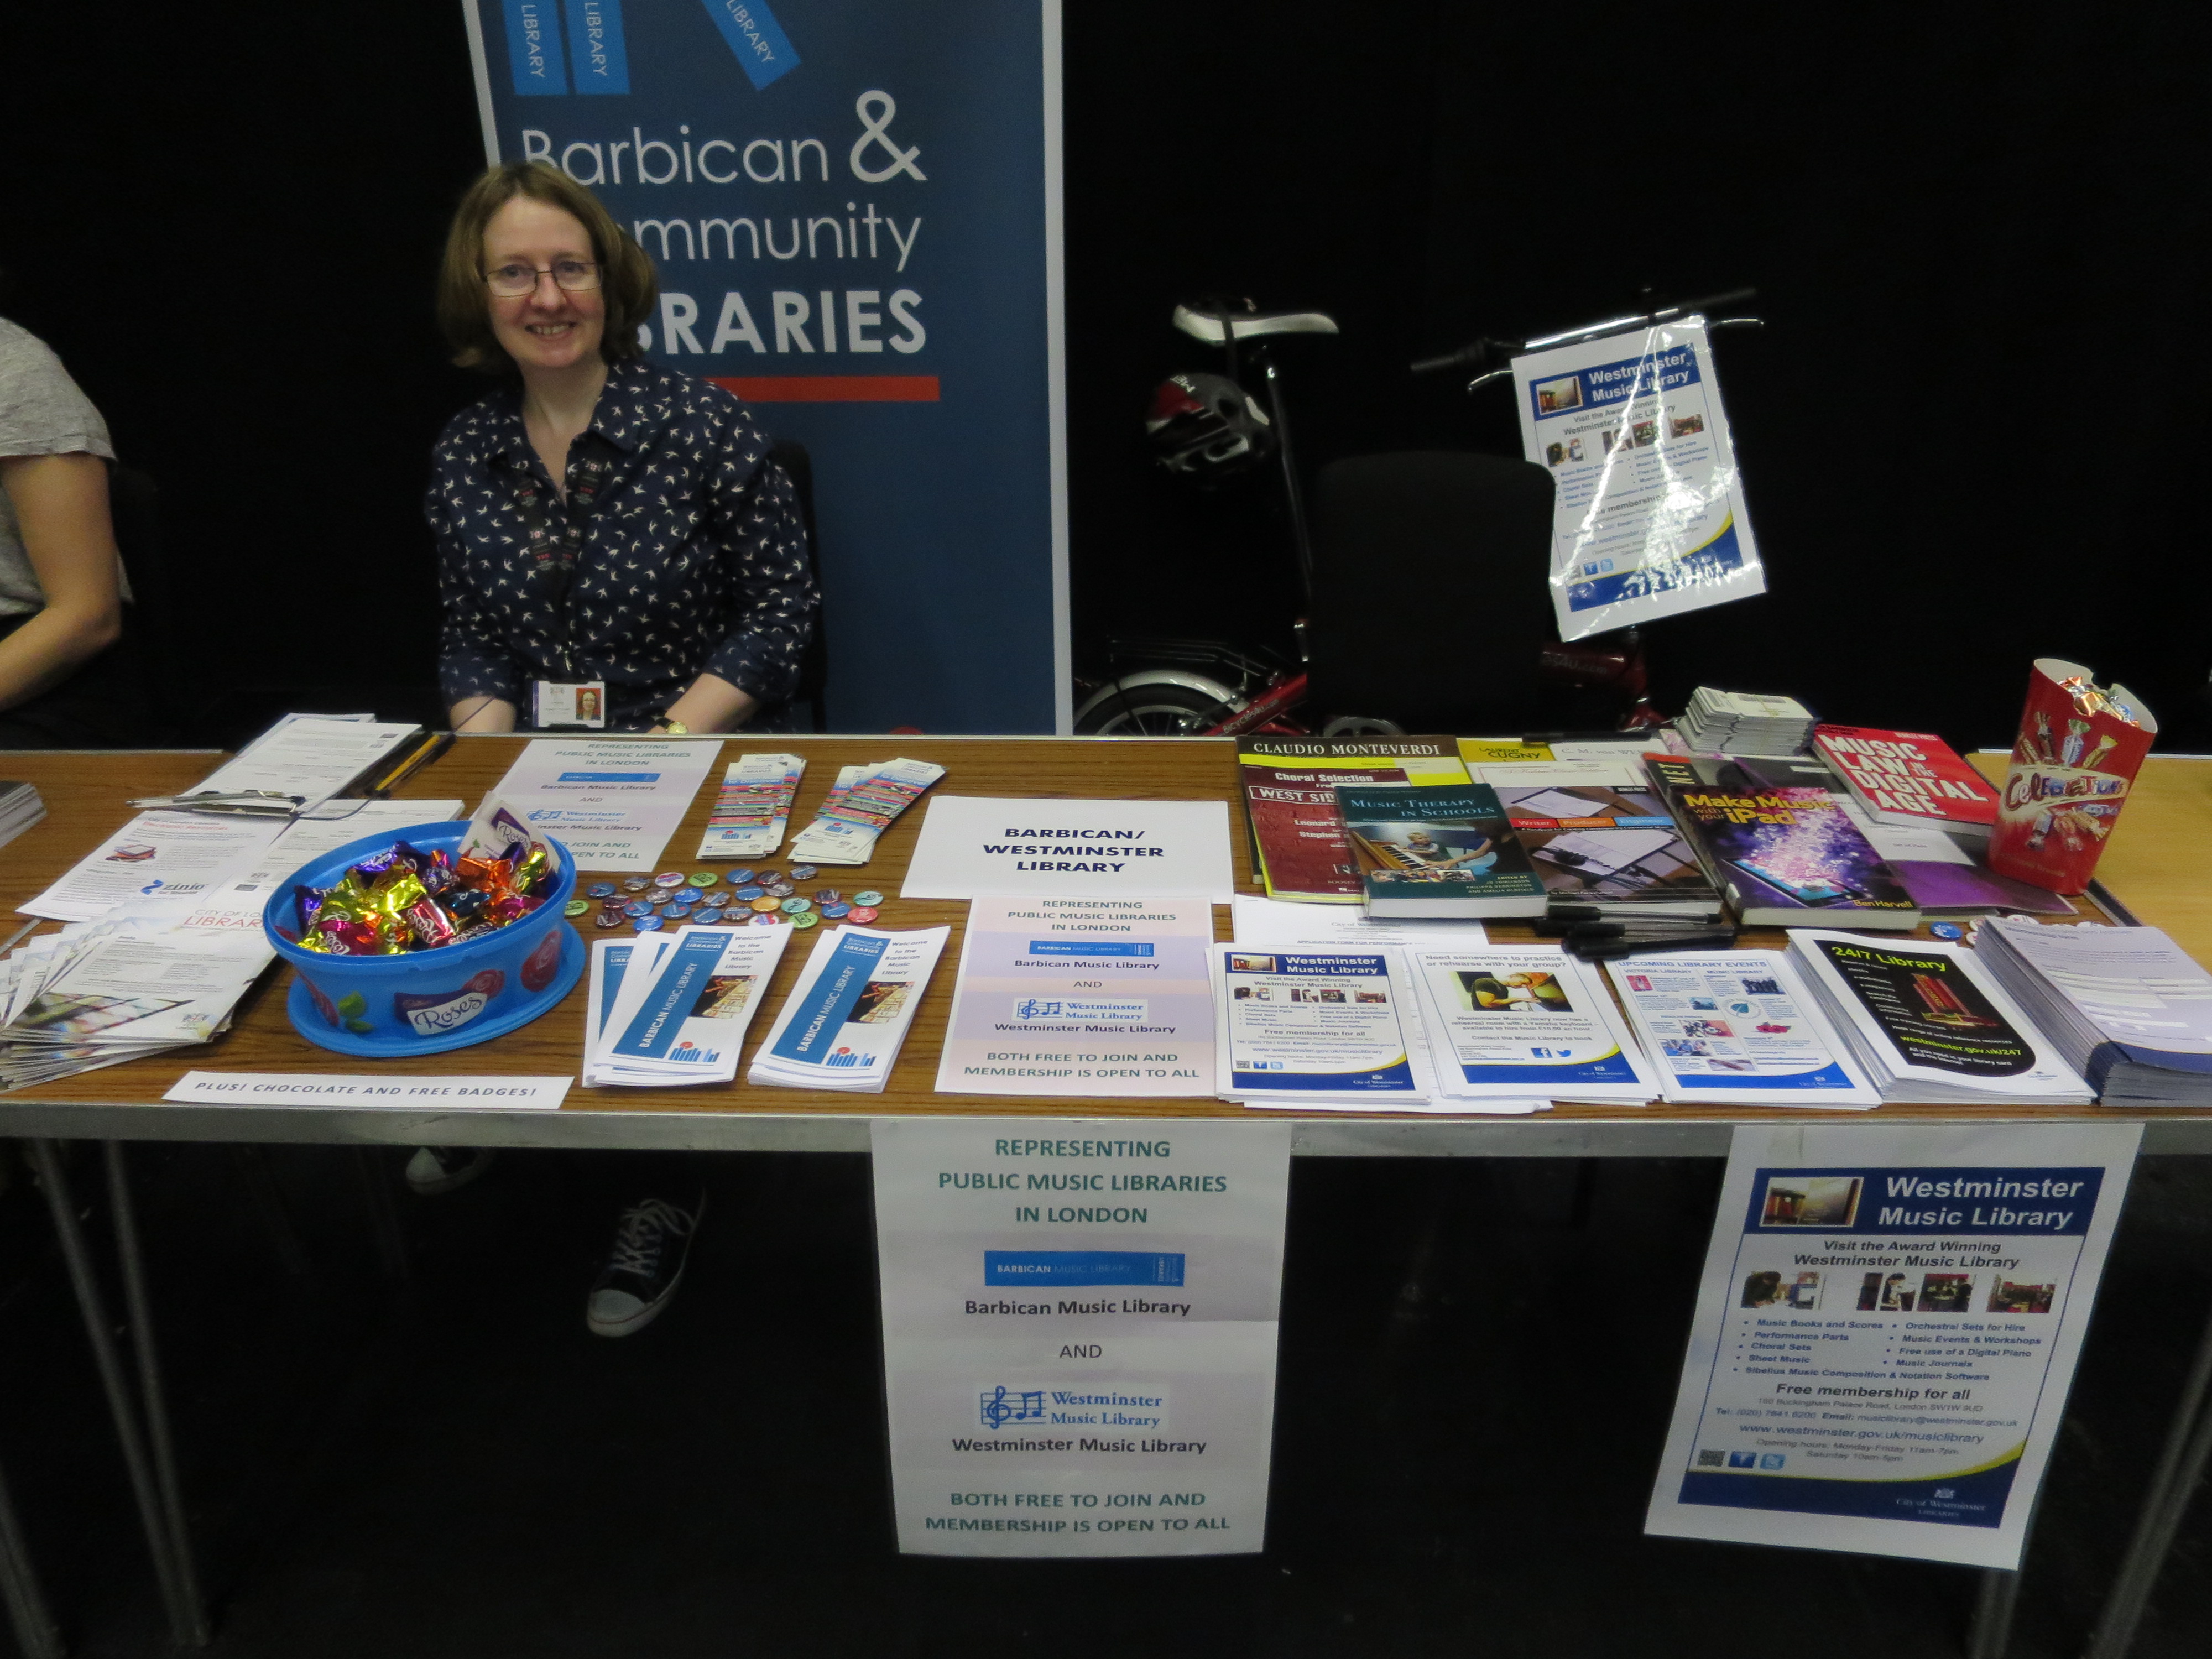 Jacky and the Barbican Music Library stall